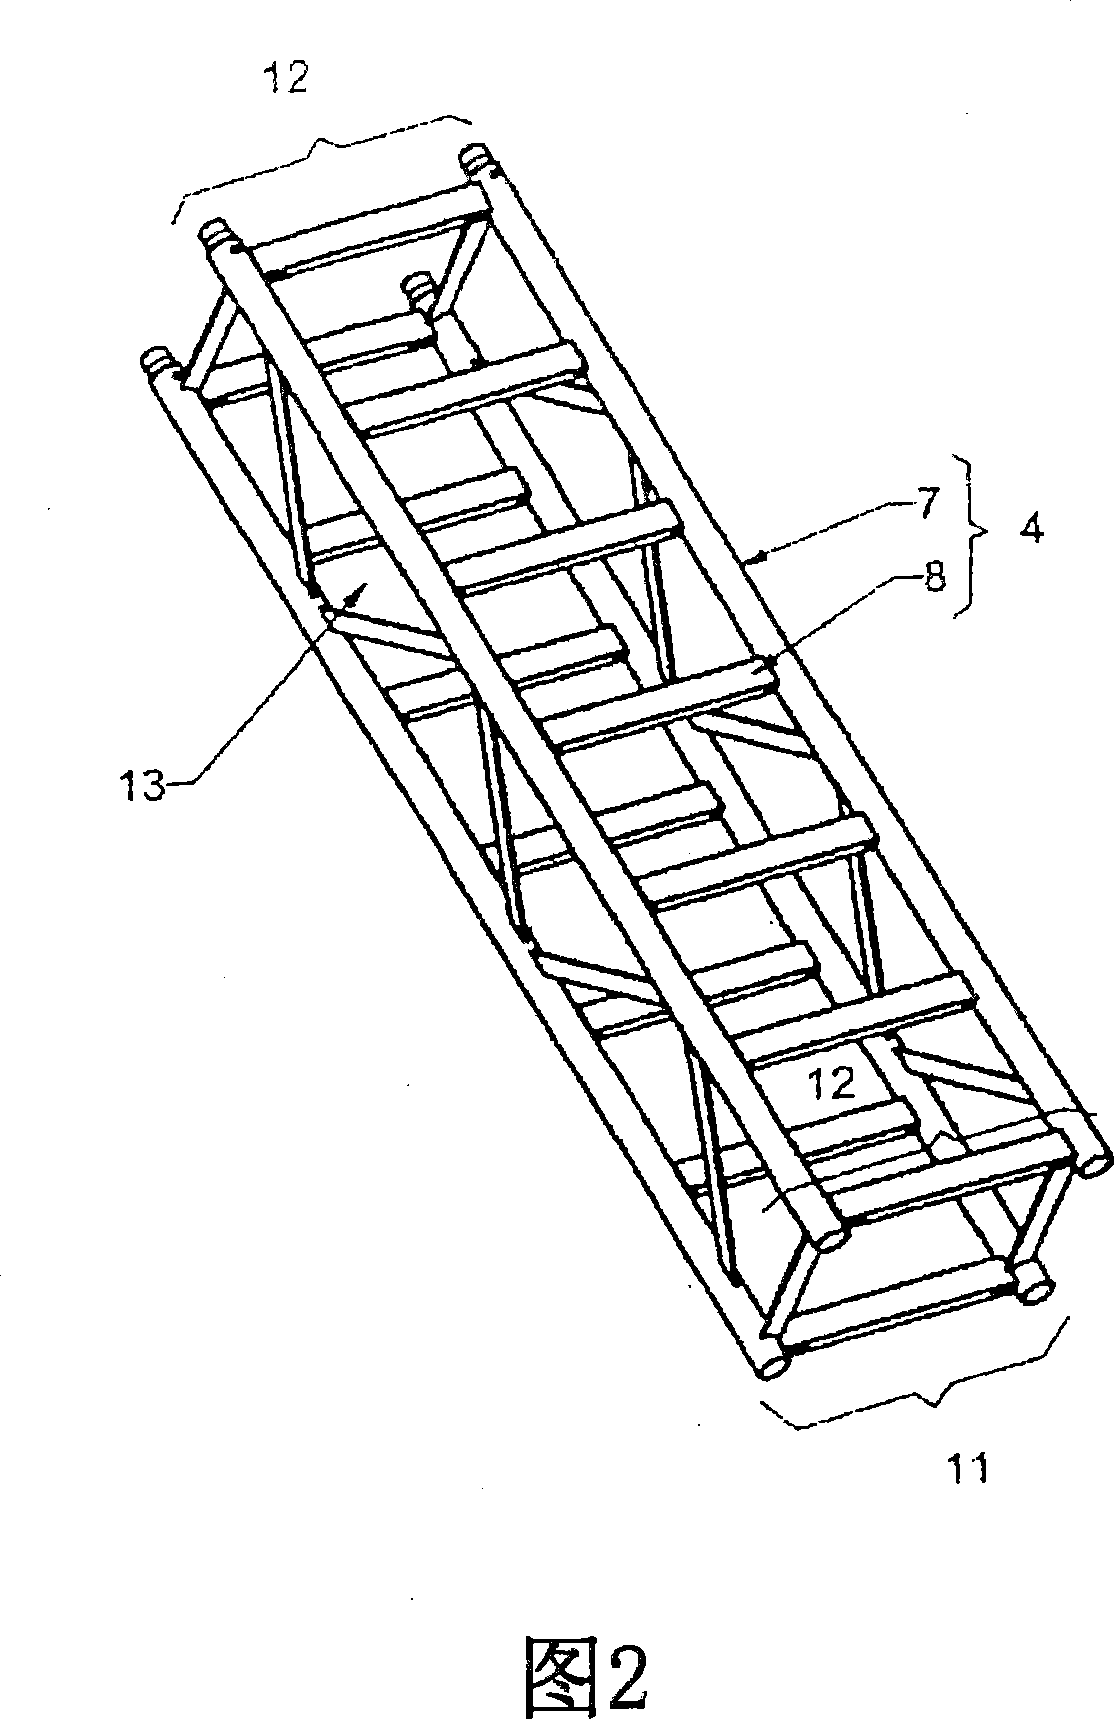 Platform support device for lifting loads or persons the height of a structure